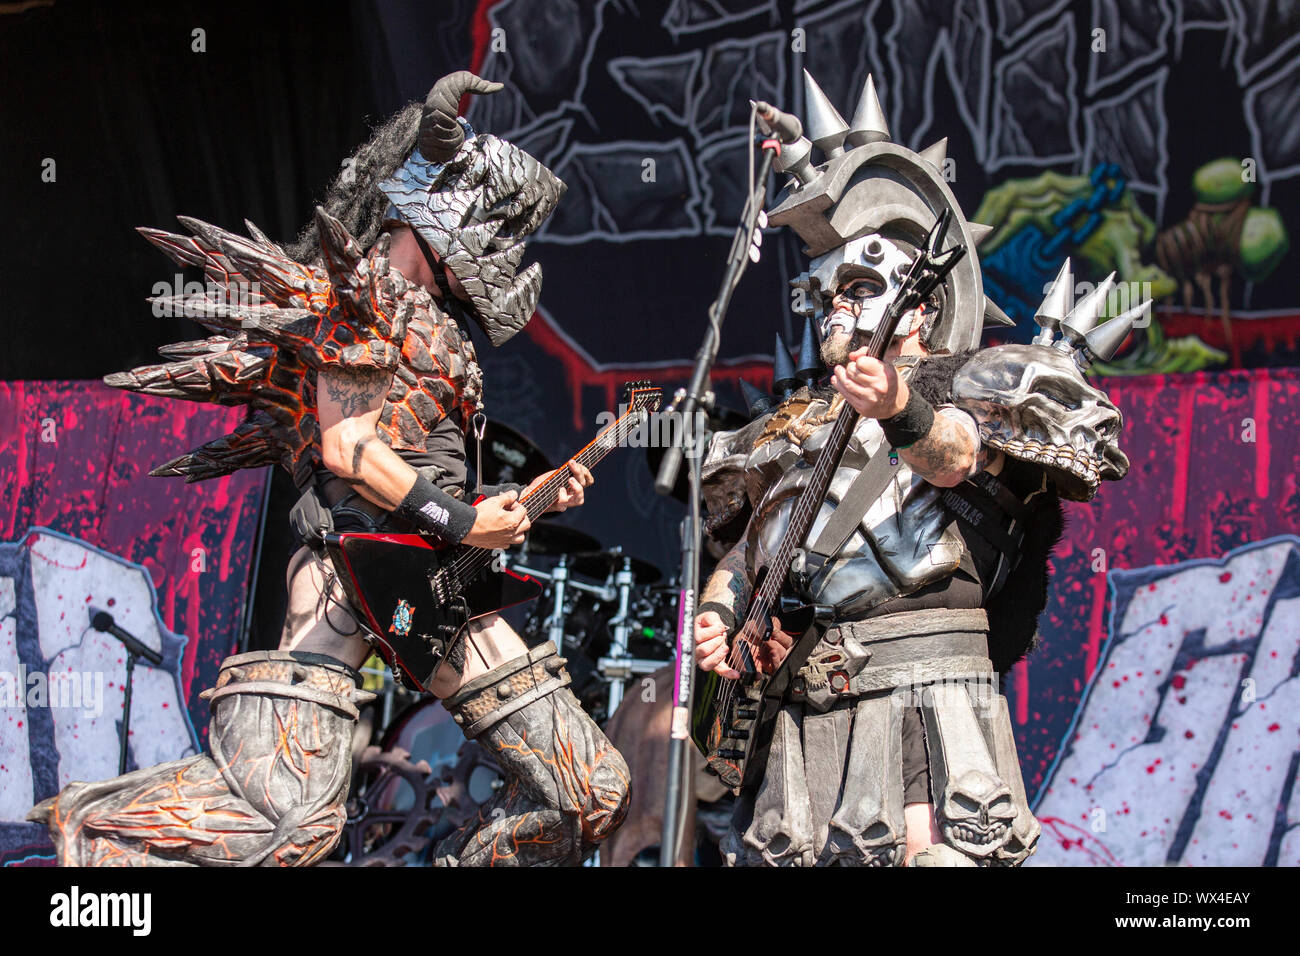 September 14, 2019, Chicago, Illinois, U.S: BALSAC THE JAWS OF DEATH (MIKE DERKS) and BEEFCAKE THE MIGHTY (CASEY ORR) of Gwar during the Riot Fest Music Festival at Douglas Park in Chicago, Illinois (Credit Image: © Daniel DeSlover/ZUMA Wire) Stock Photo